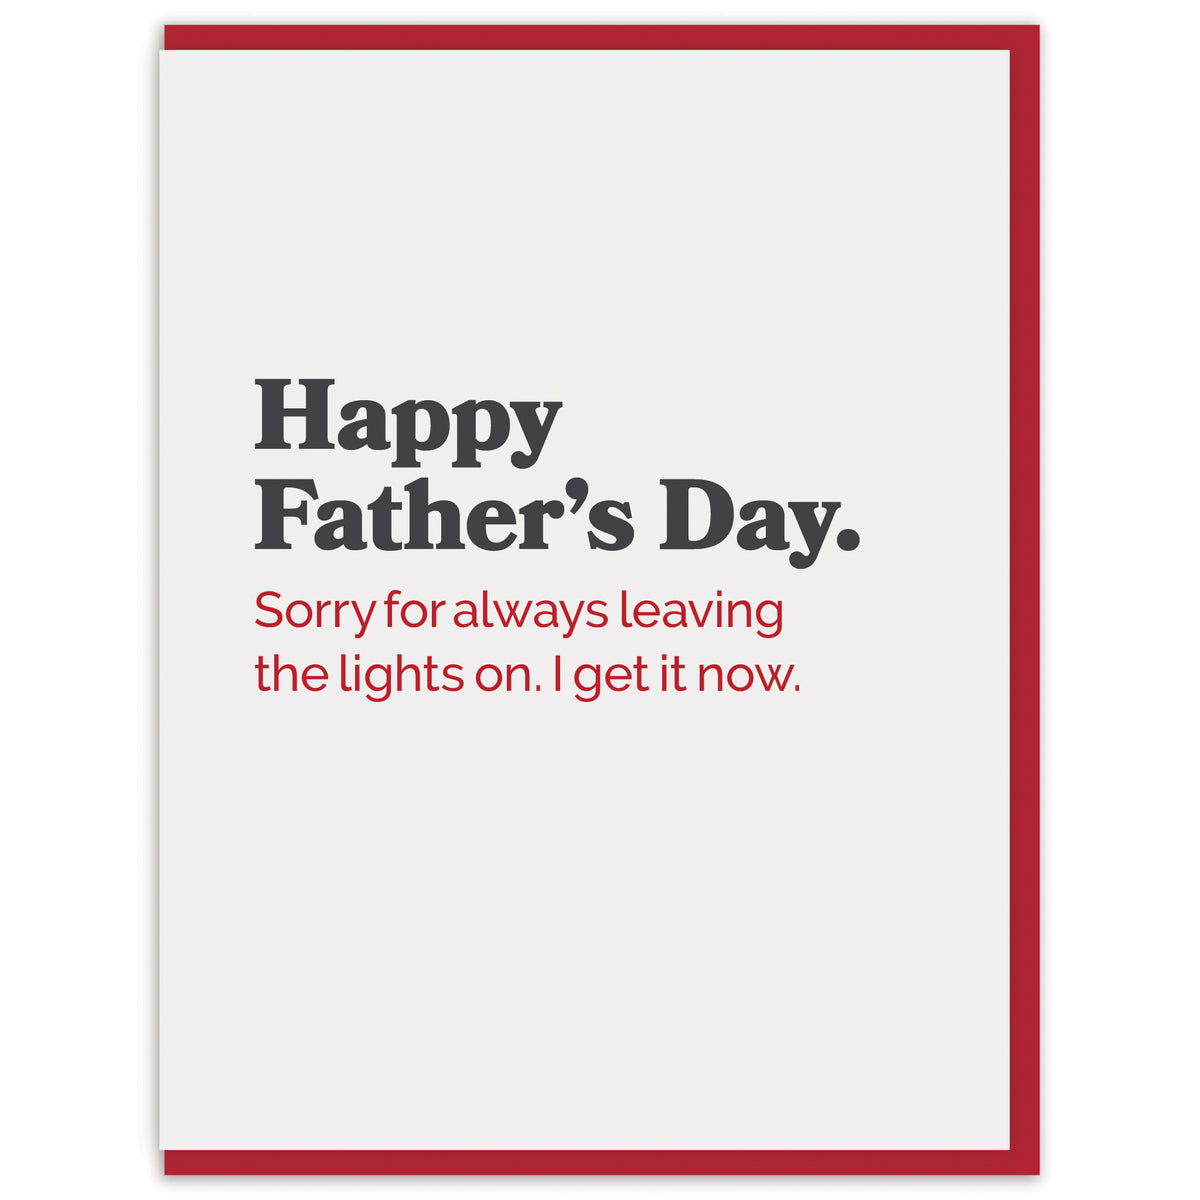 Happy Father’s Day. Sorry for always leaving the lights on. I get it now.